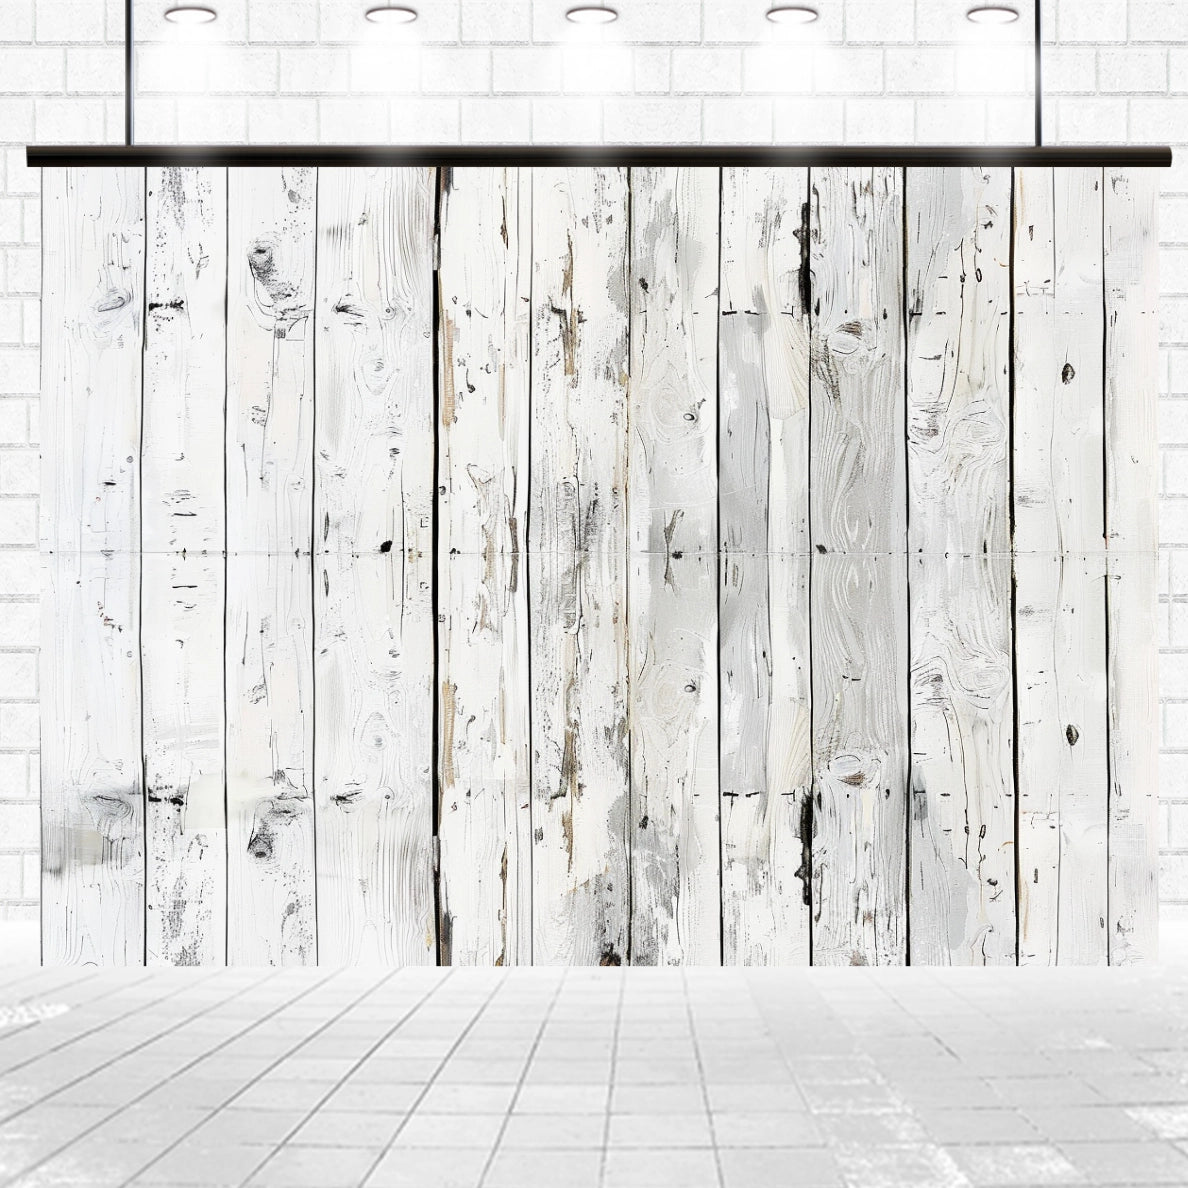 A backdrop of **Wood Backdrop Retro Rustic White Gray Wooden Floor Background for Photography Kids Photo Booth Video Shoot Studio Prop** by **ideasbackdrop**, set against a tiled floor and a brick-textured wall with ceiling lights overhead.